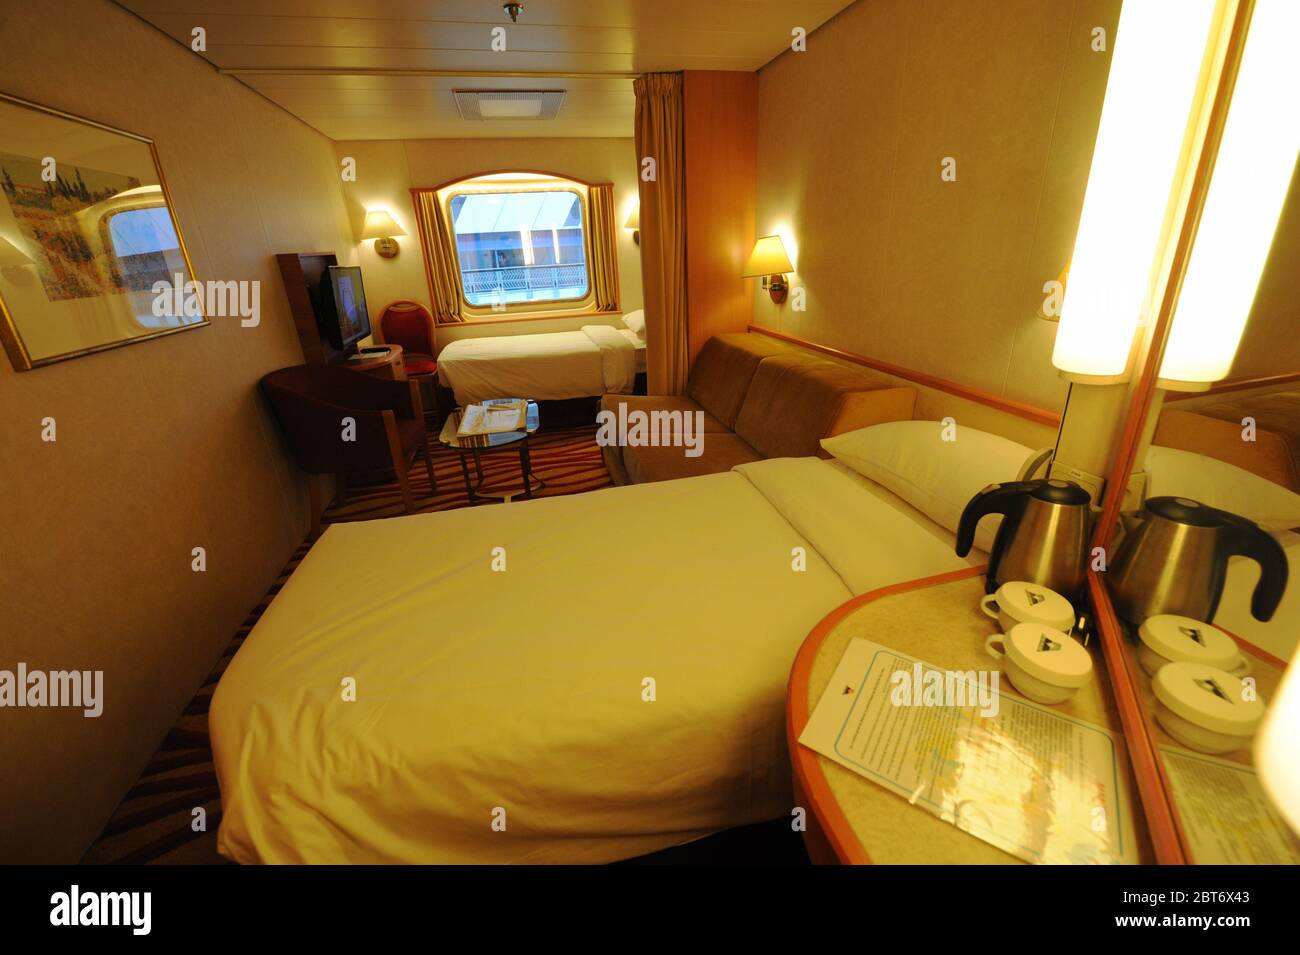 Singapore. 23rd May, 2020. Photo shows the cabin for accommodating migrant  workers aboard the SuperStar Gemini cruise ship berthed at Singapore's  Marina Bay Cruise Centre on May 23, 2020. SuperStar Gemini cruise